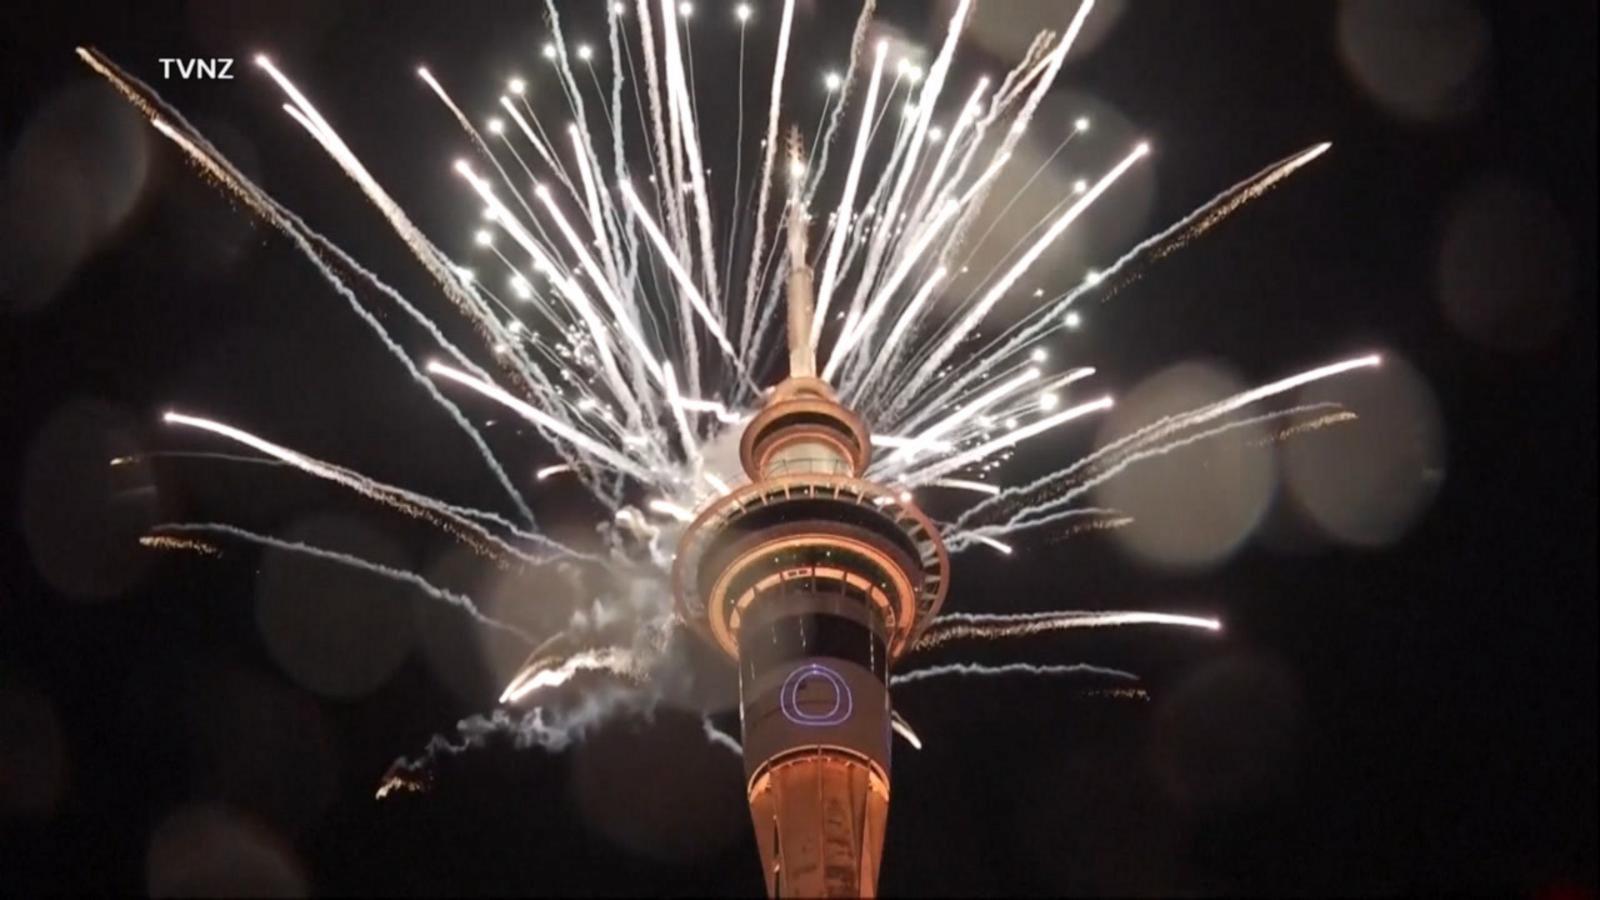 VIDEO: New Year's celebrations underway across the world